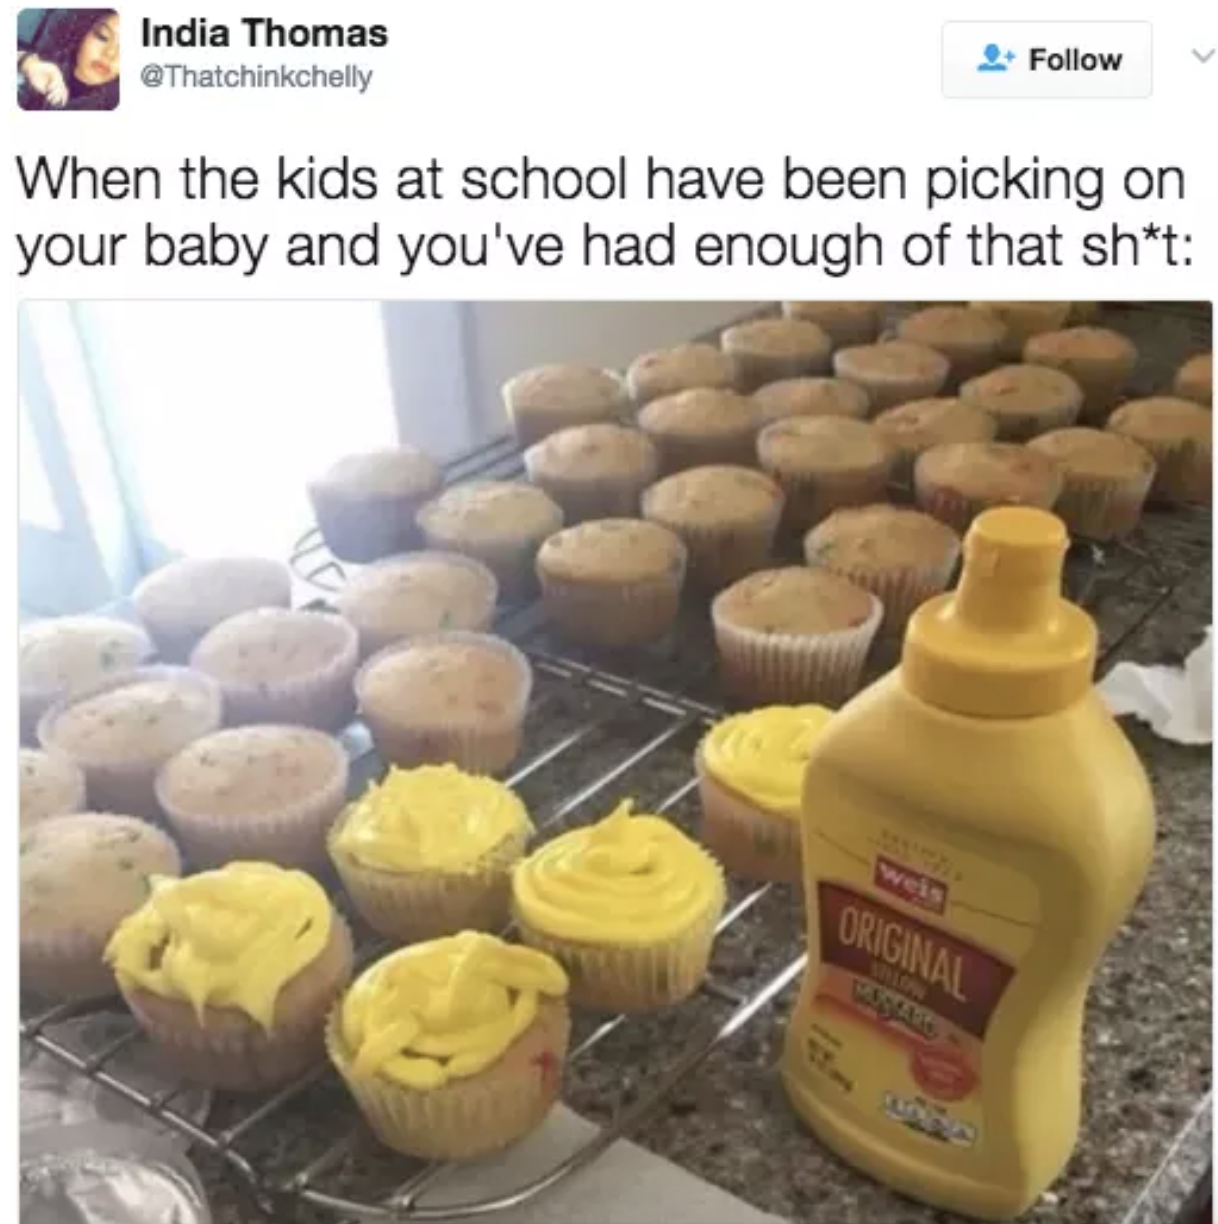 A picture of many muffins baking, with several showing a yellow topping and a bottle of mustard alongside them, with the caption, &quot;When the kids at school have been picking o your baby and you&#x27;ve had enough of that shit&quot;